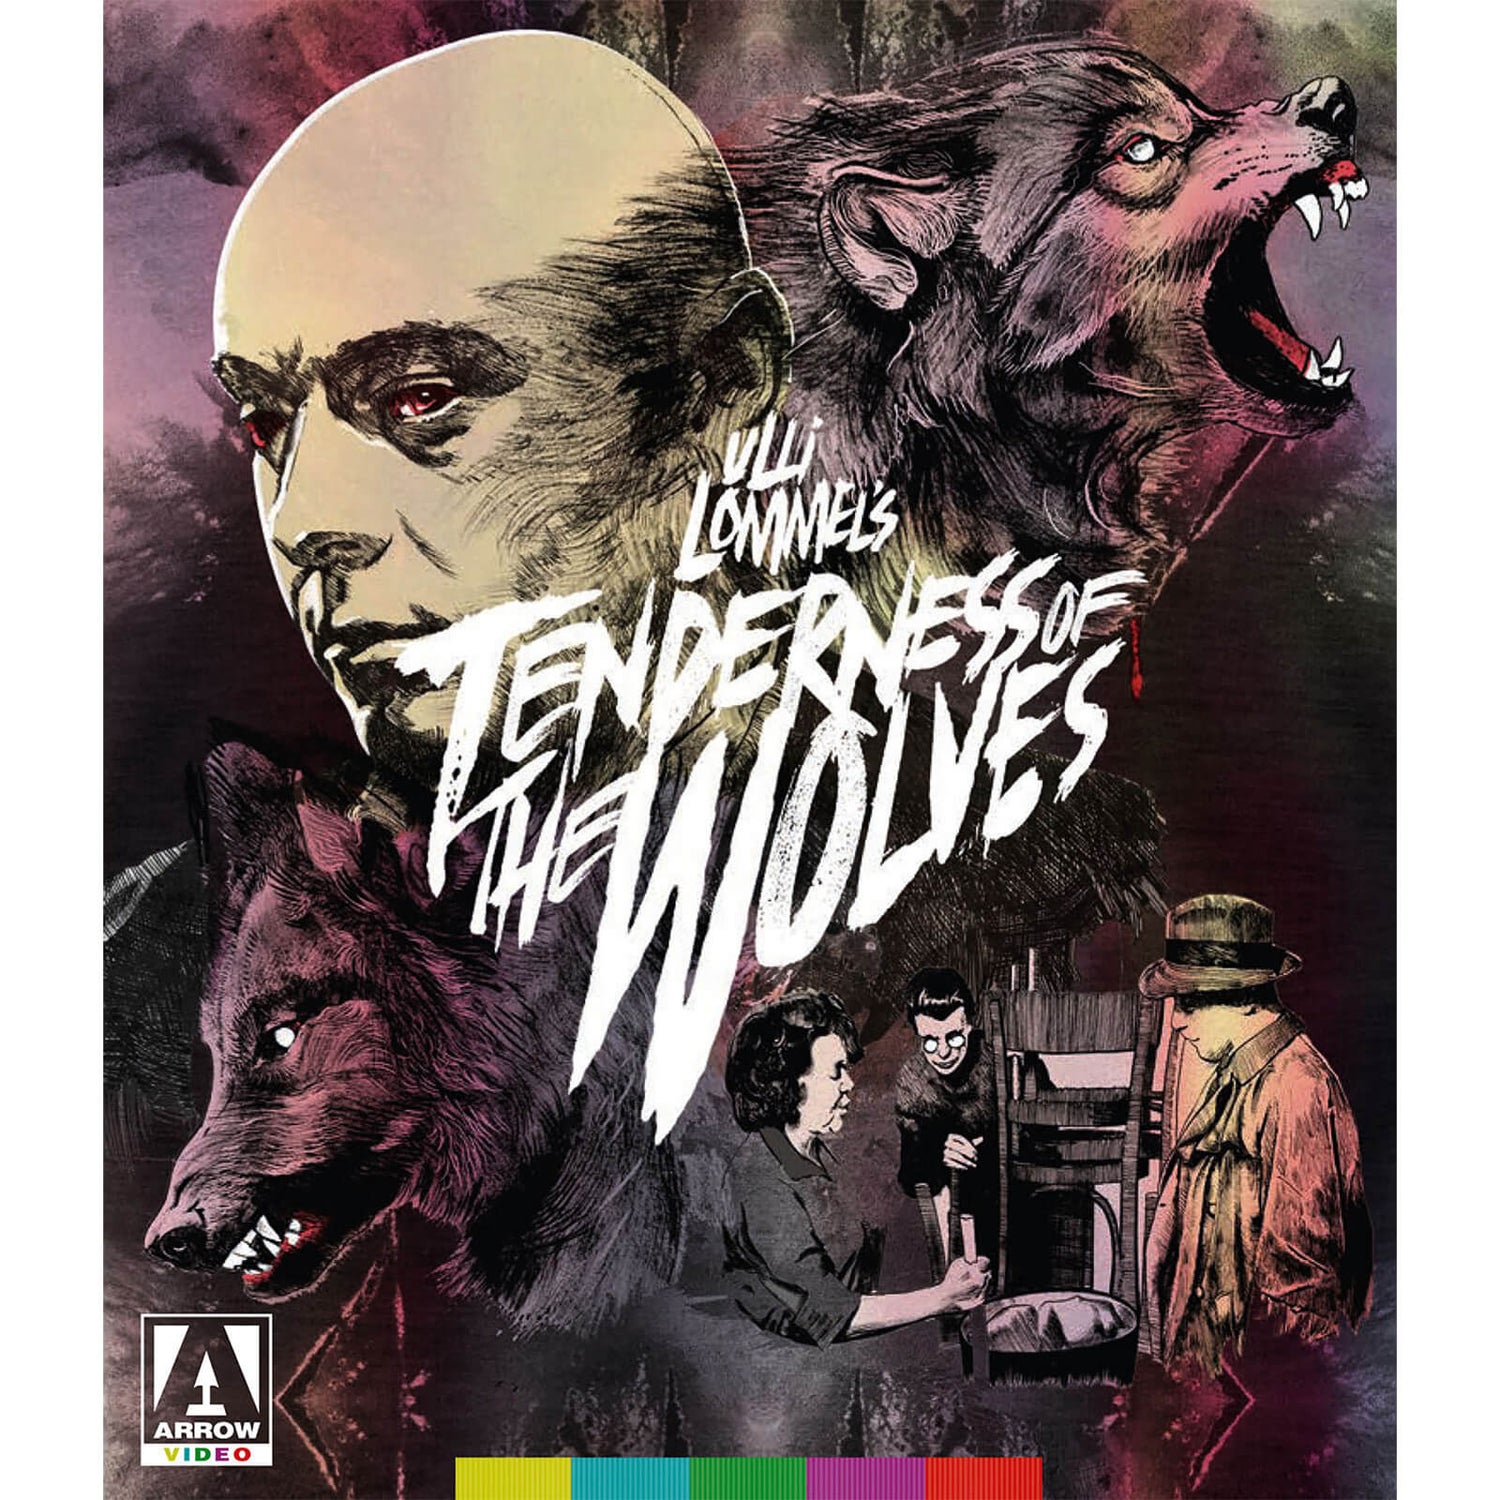 Tenderness Of The Wolves (Includes DVD)